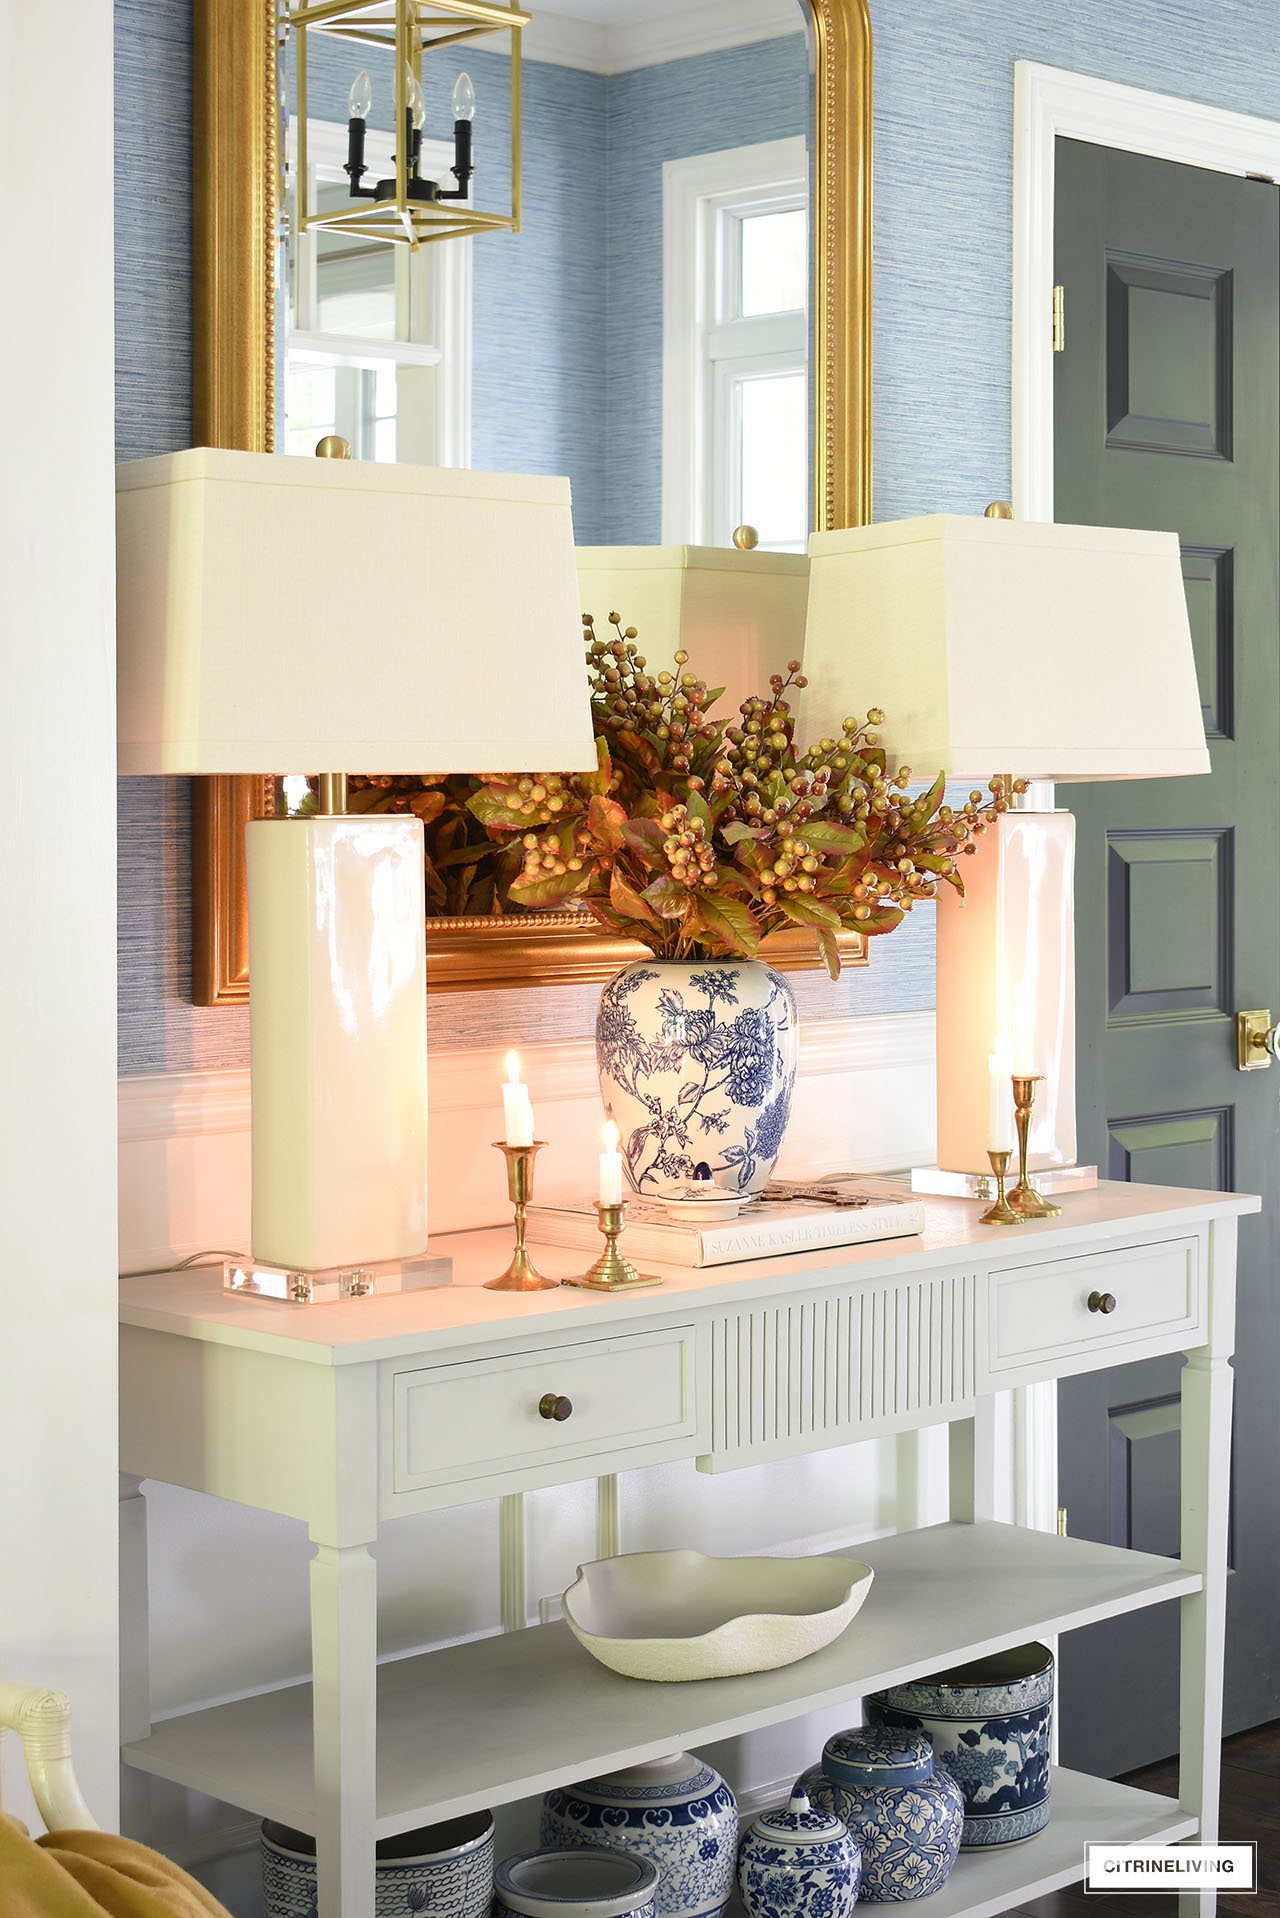 Ivory lamps flank a fall arrangement on a light grey console table.